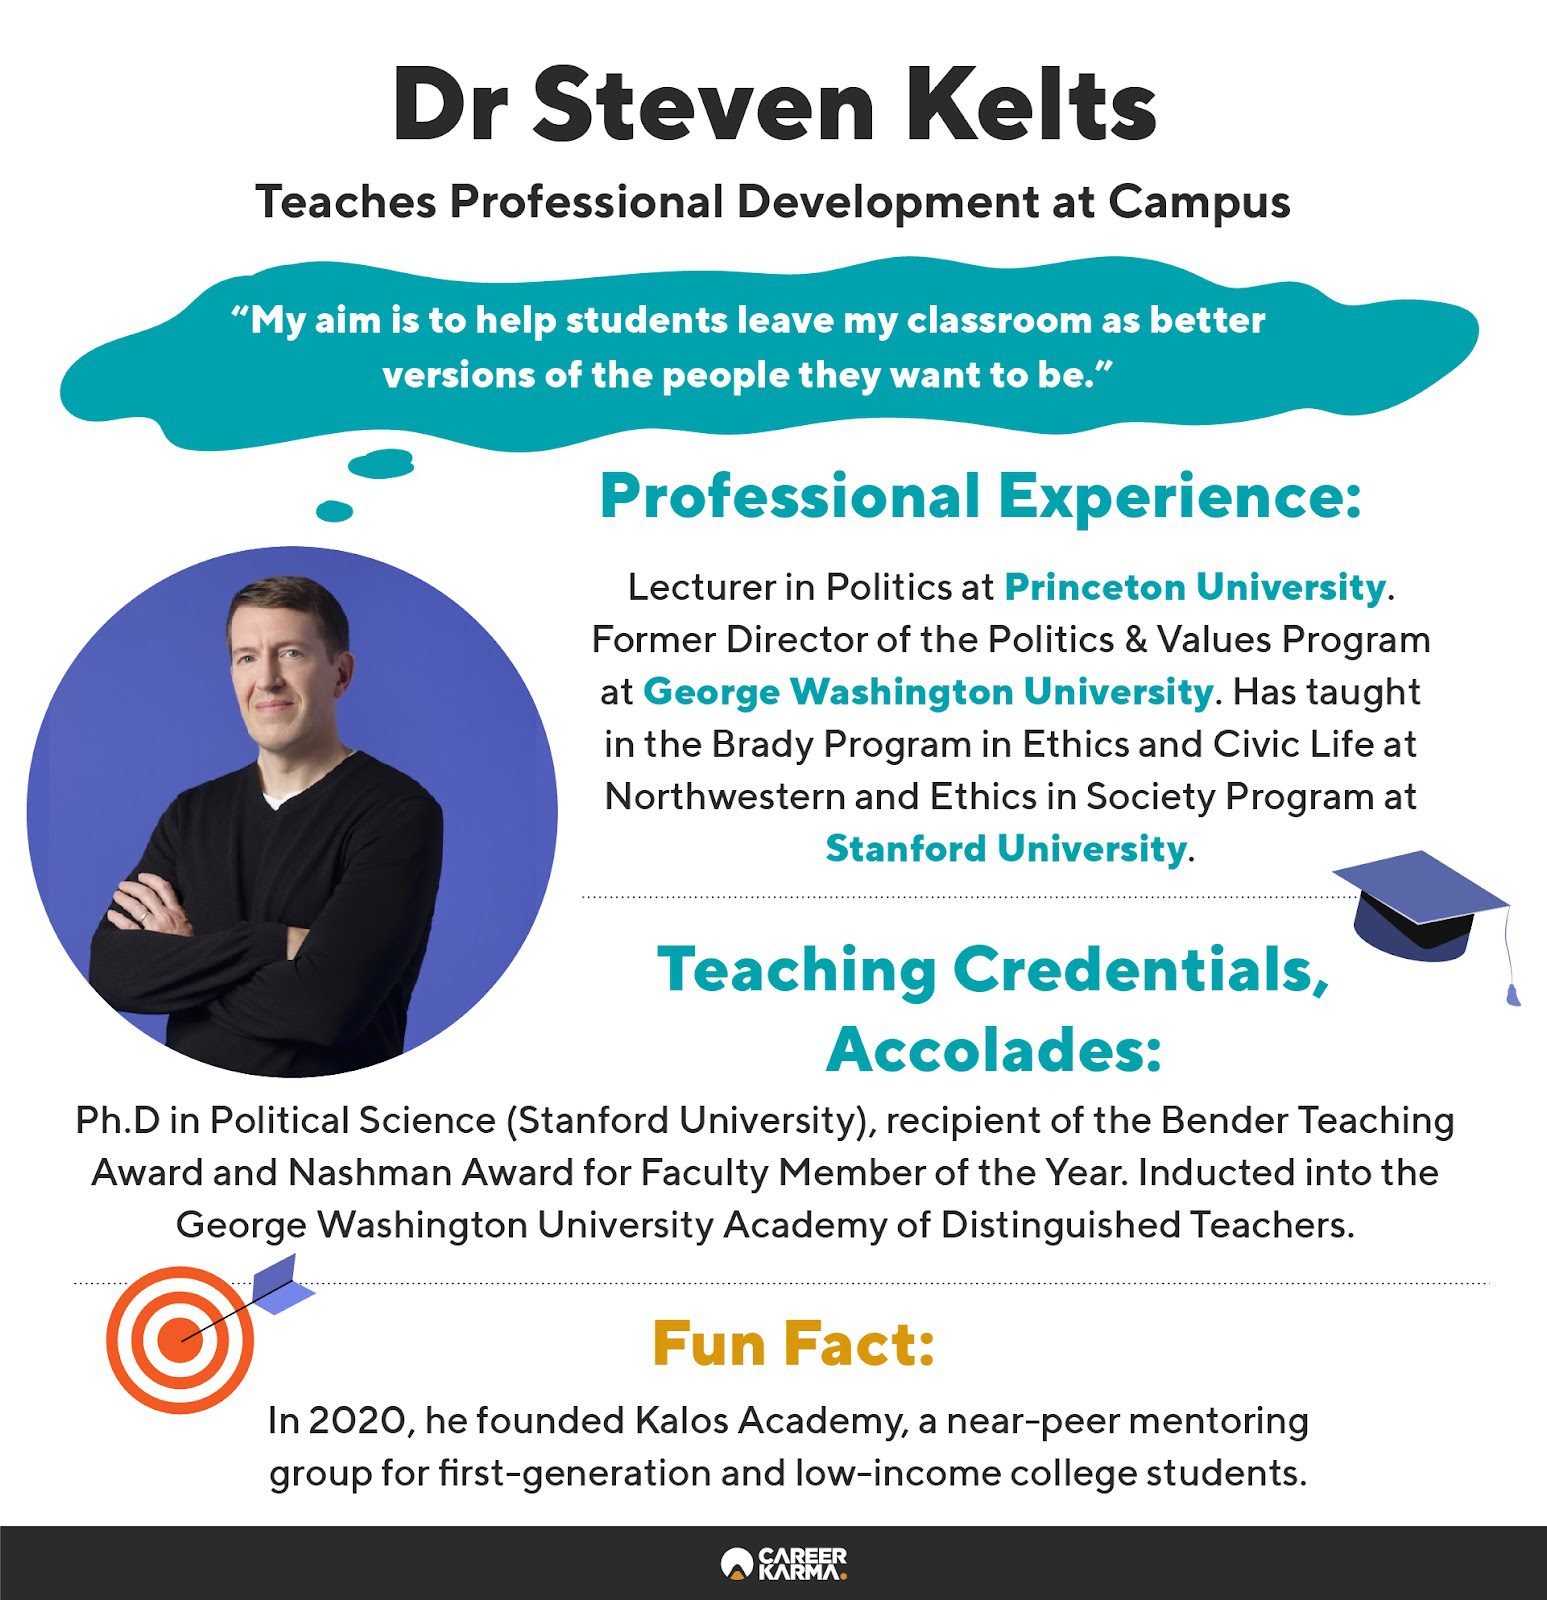 An infographic featuring a profile of Dr. Steven Kelts